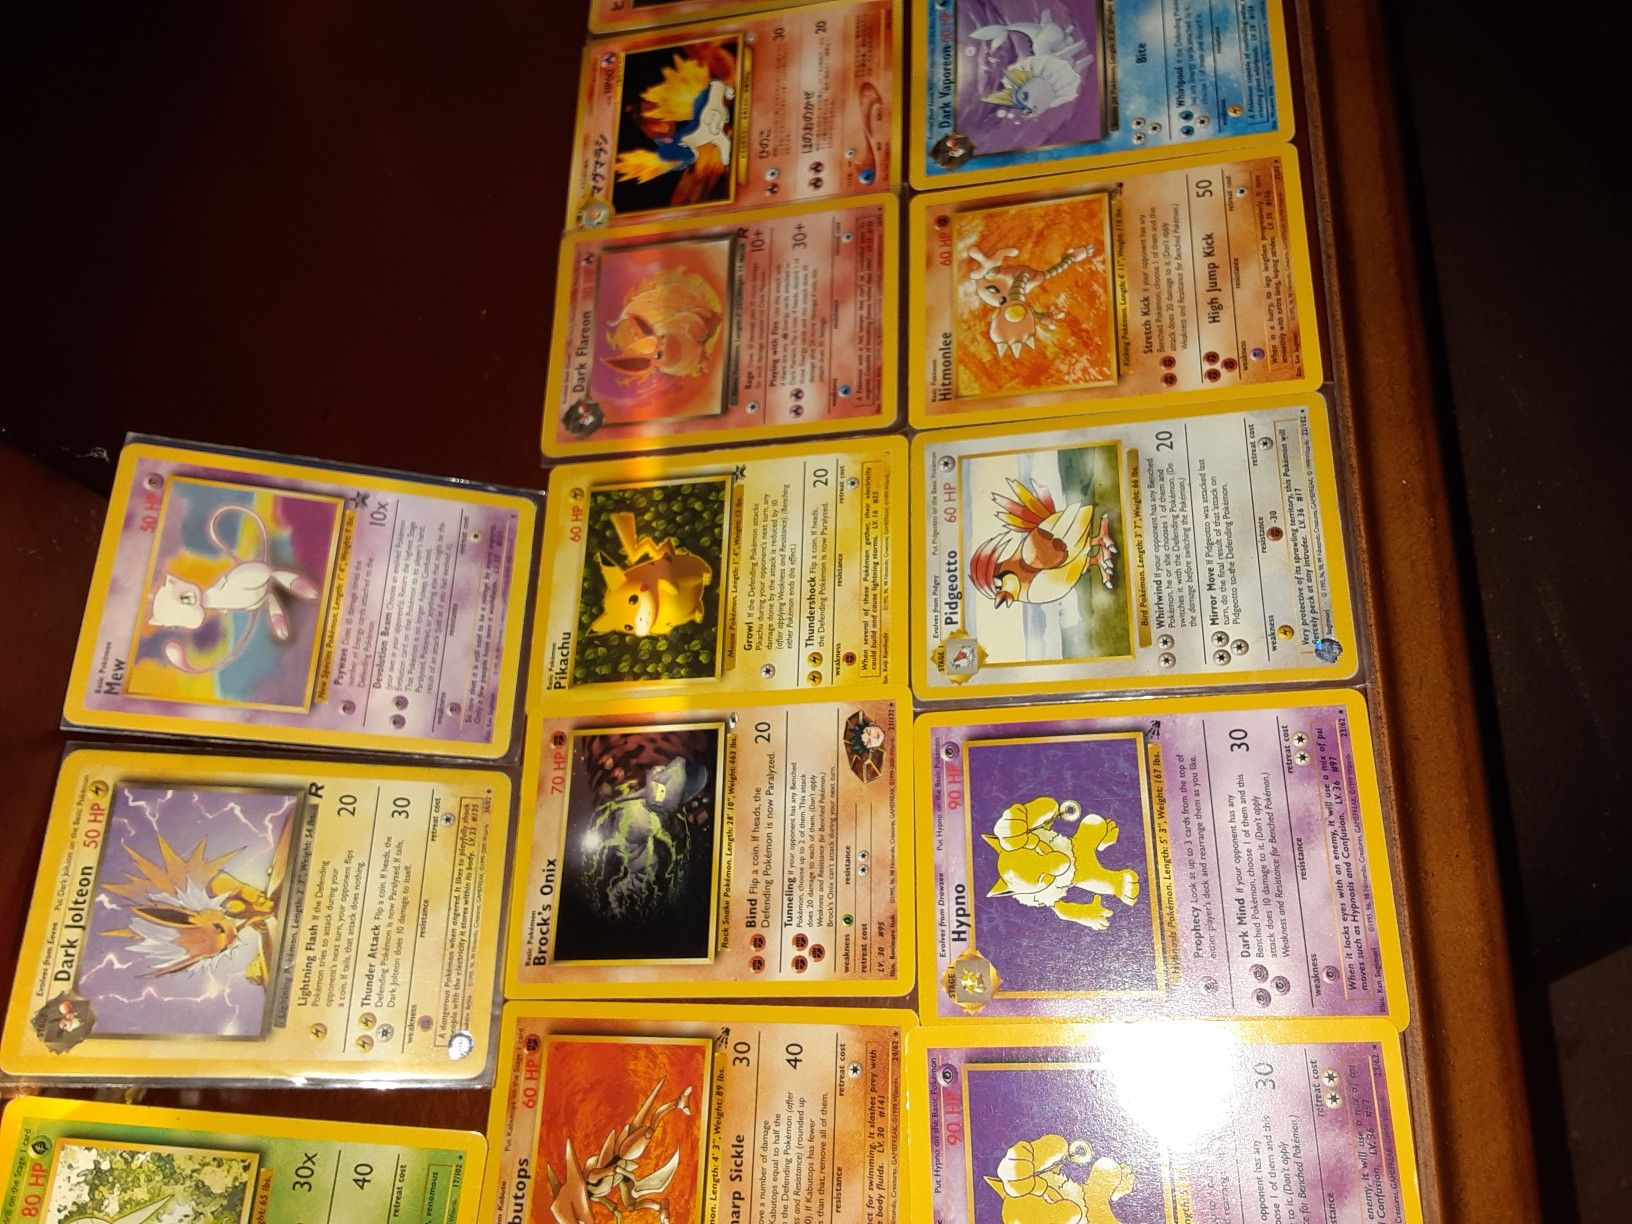 Pokemon cards!!! Some of the holographic type 1st gen fossils very nice collection.